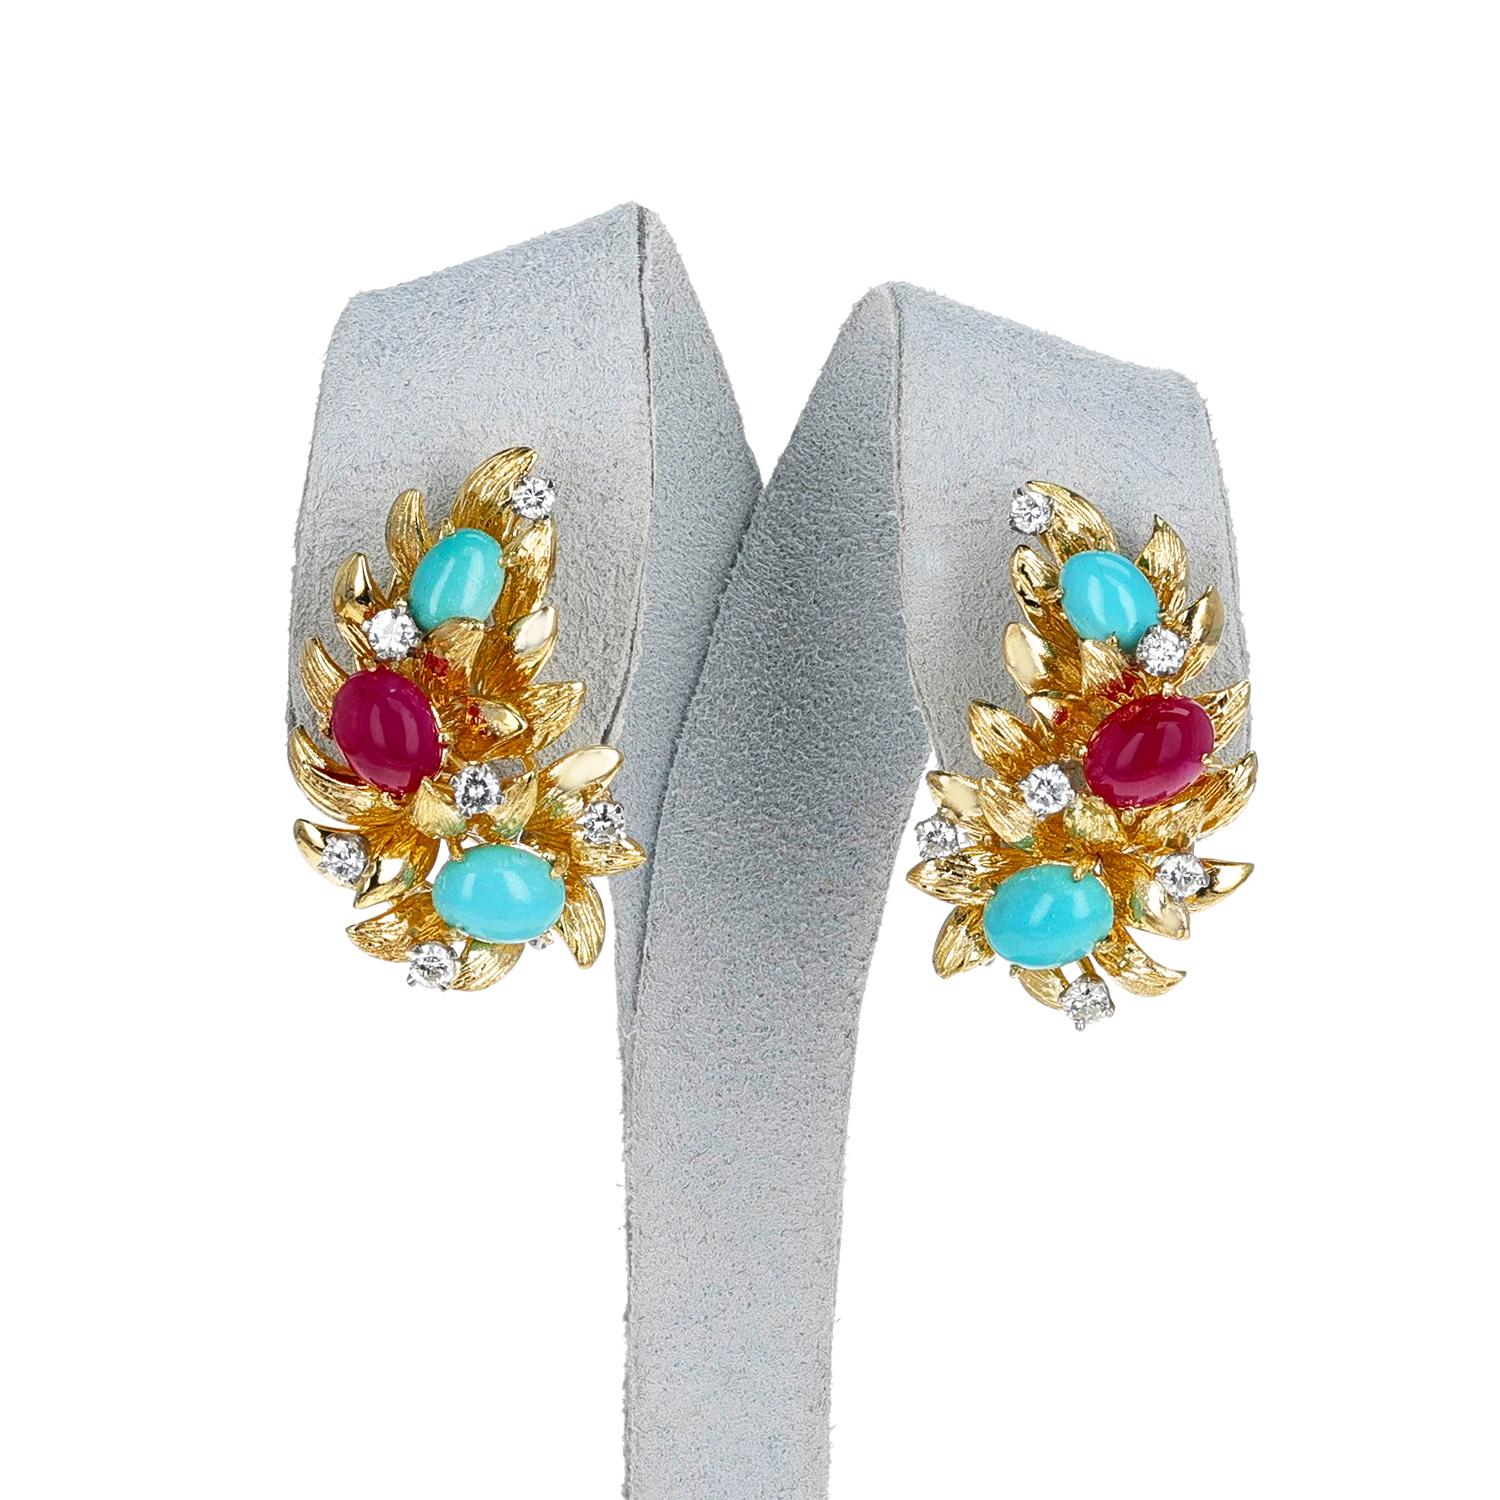 A pair of Ruby, Turquoise and Diamond Gold Leaf Earrings made in 18k Gold. The ruby cabochons weigh appx. 3 carats and the diamonds weigh appx. 0.60 carats. The total weight of the earring is 23.24 grams. The length is 1.20 inches. 